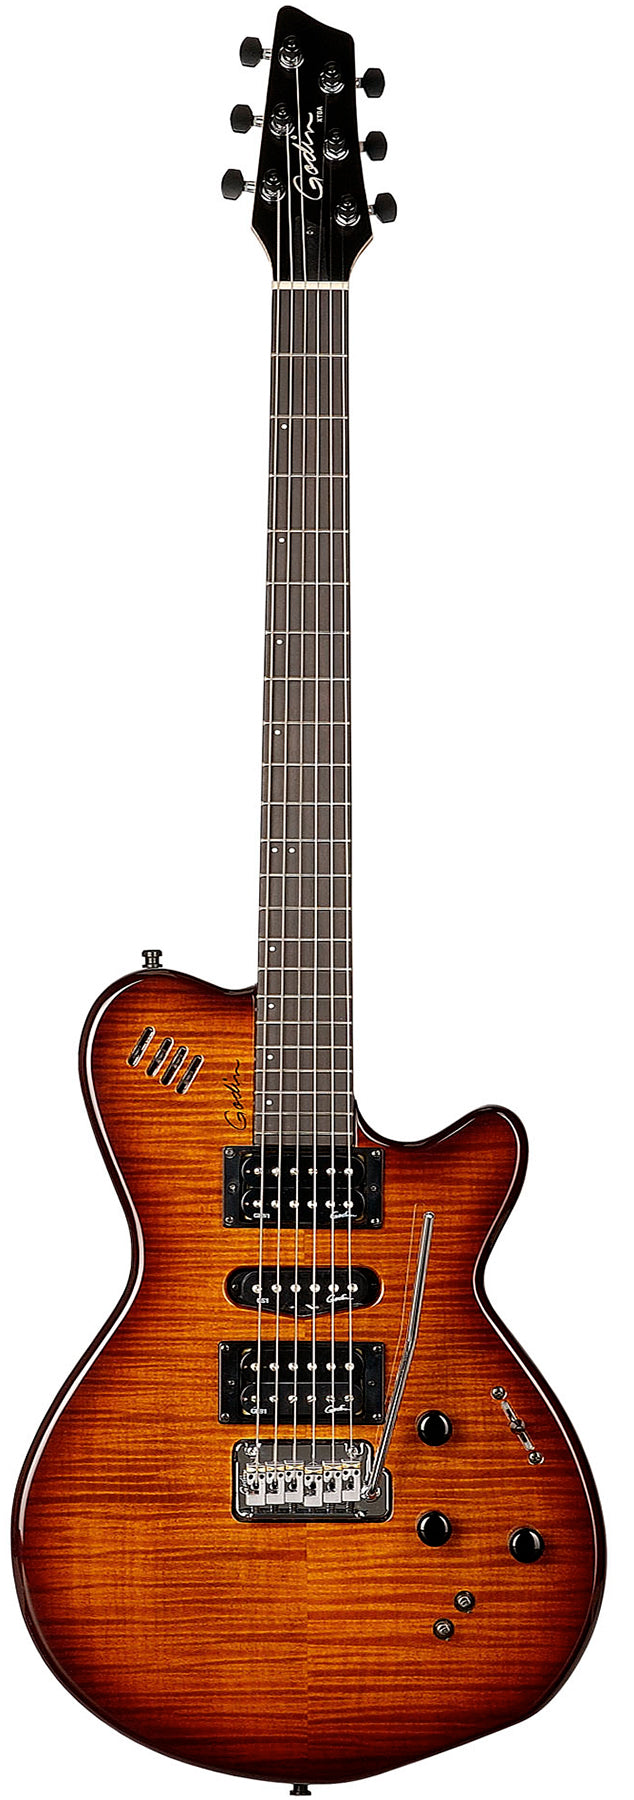 Godin 028672 xtSA  - Synth Access - 3 Voice  Light Burst Flame - Electric Guitar Made In Canada